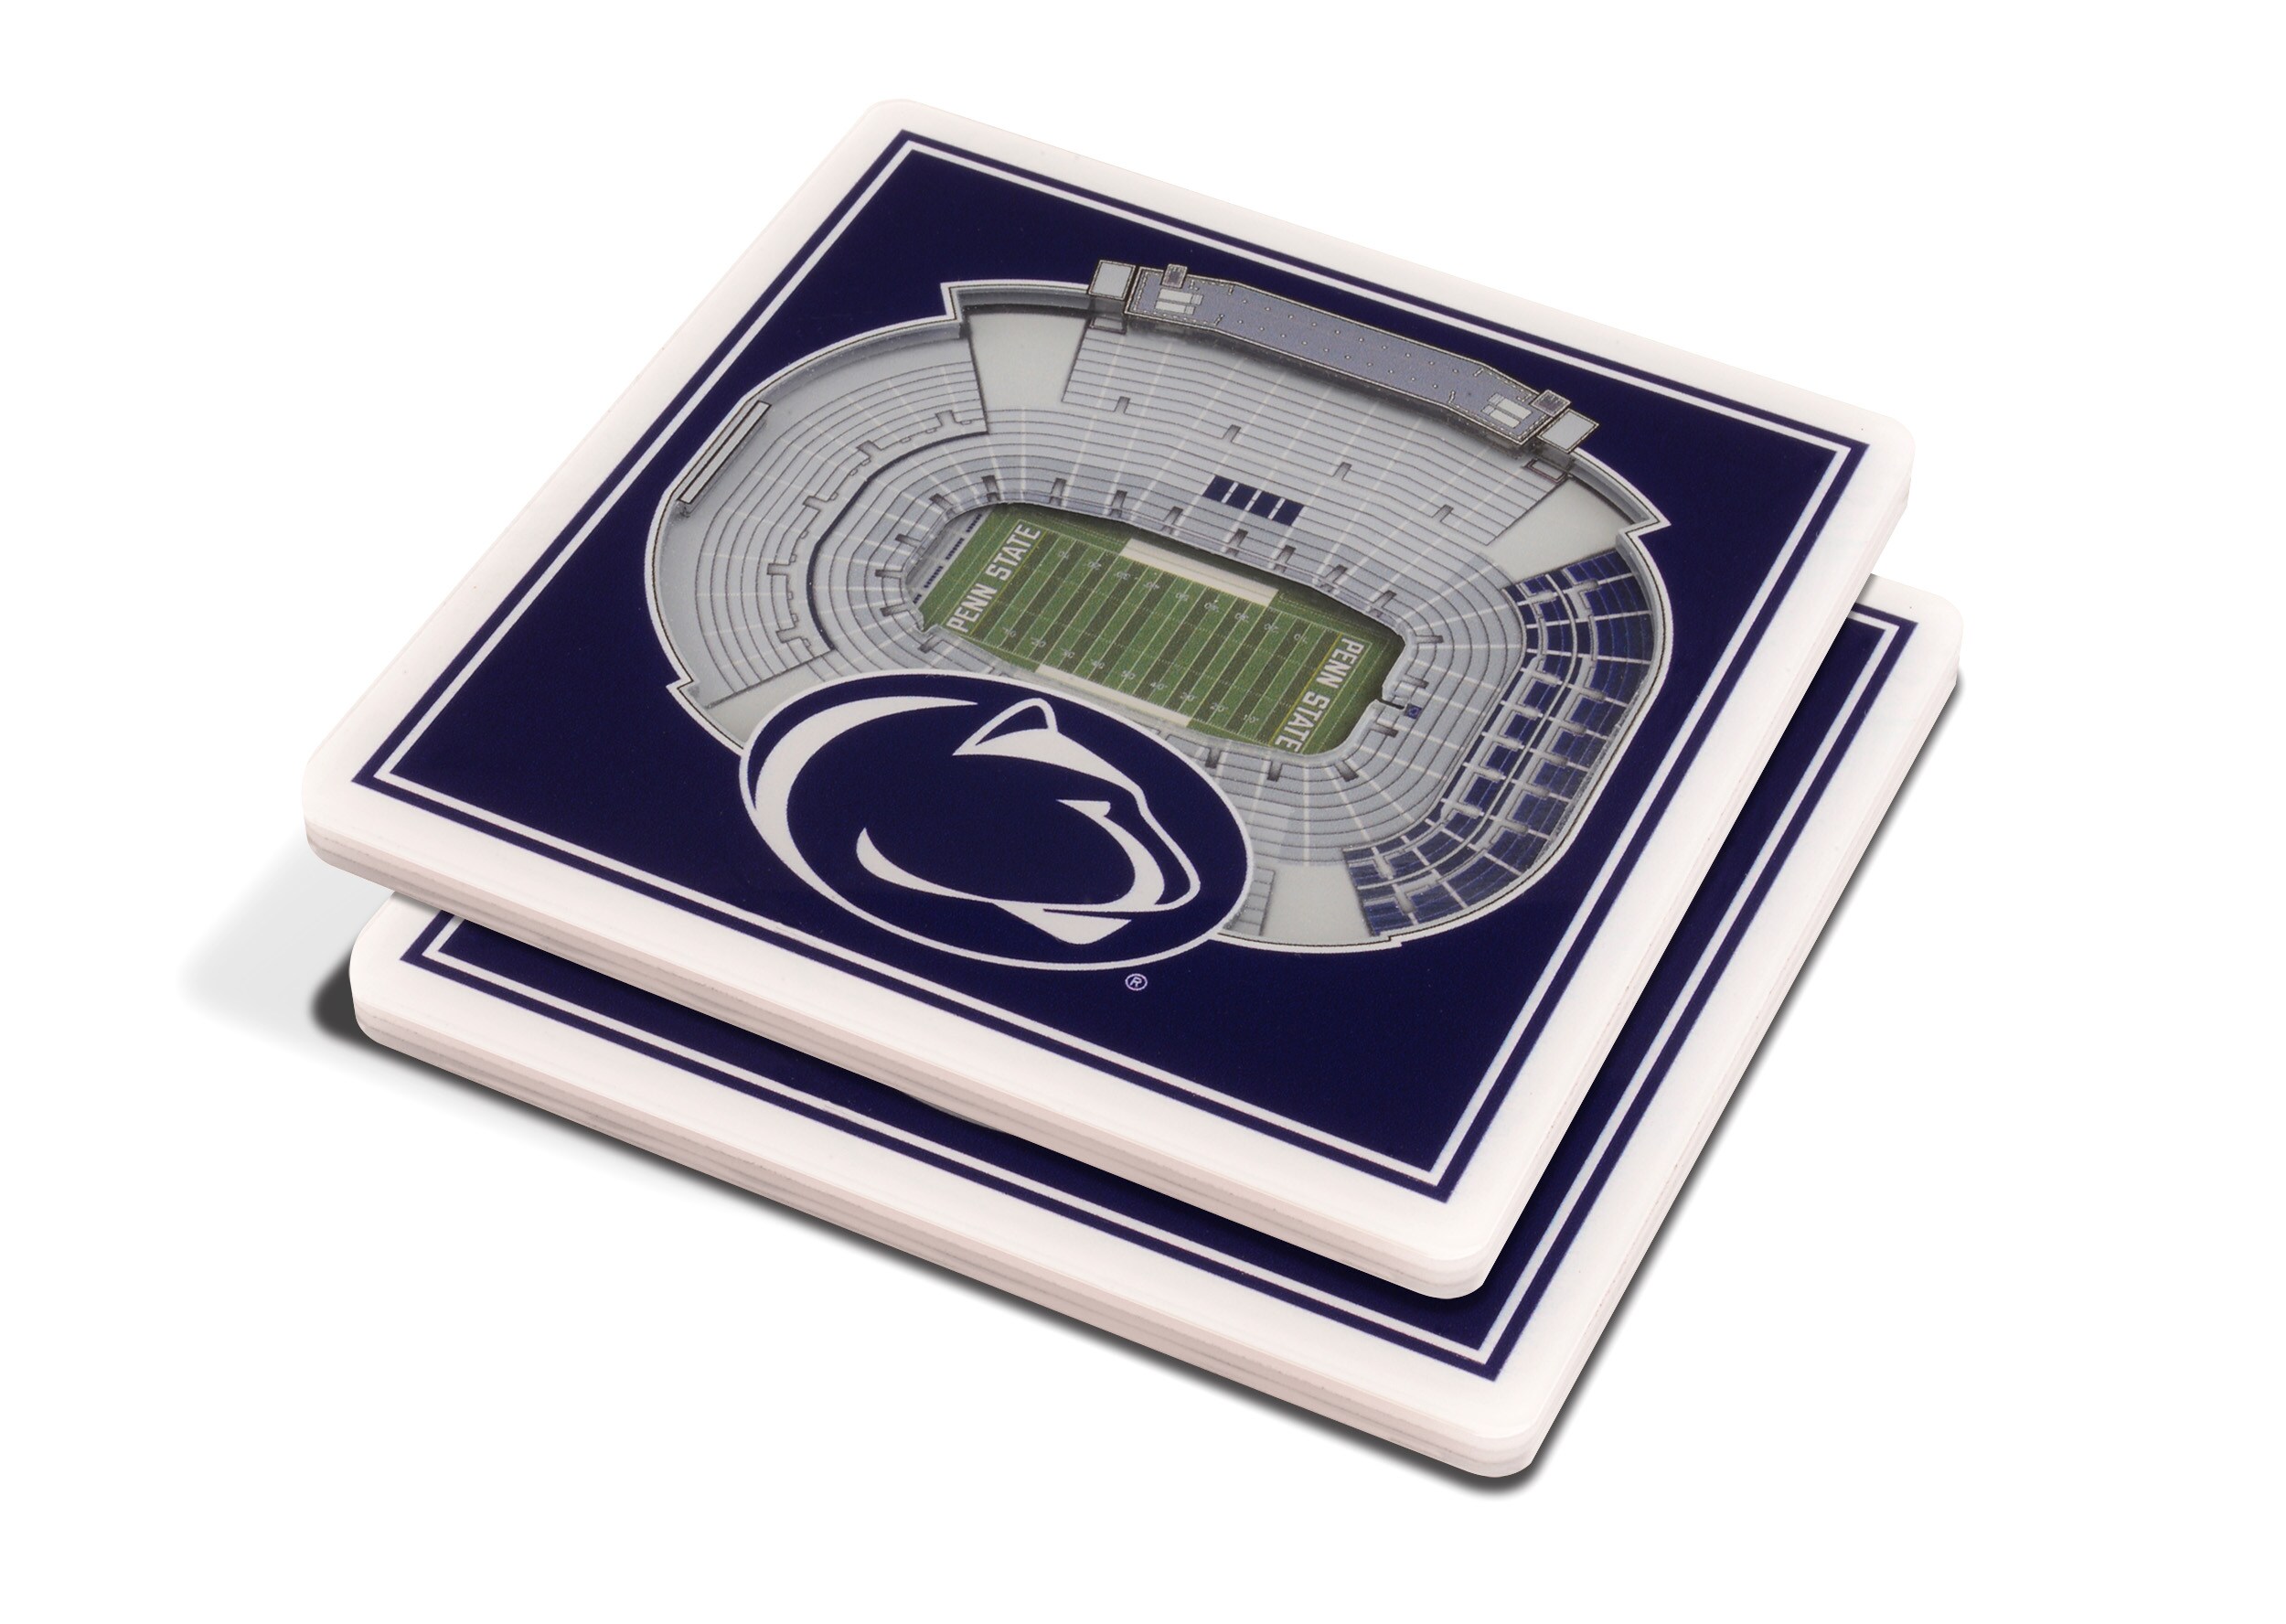 Penn State Coolers